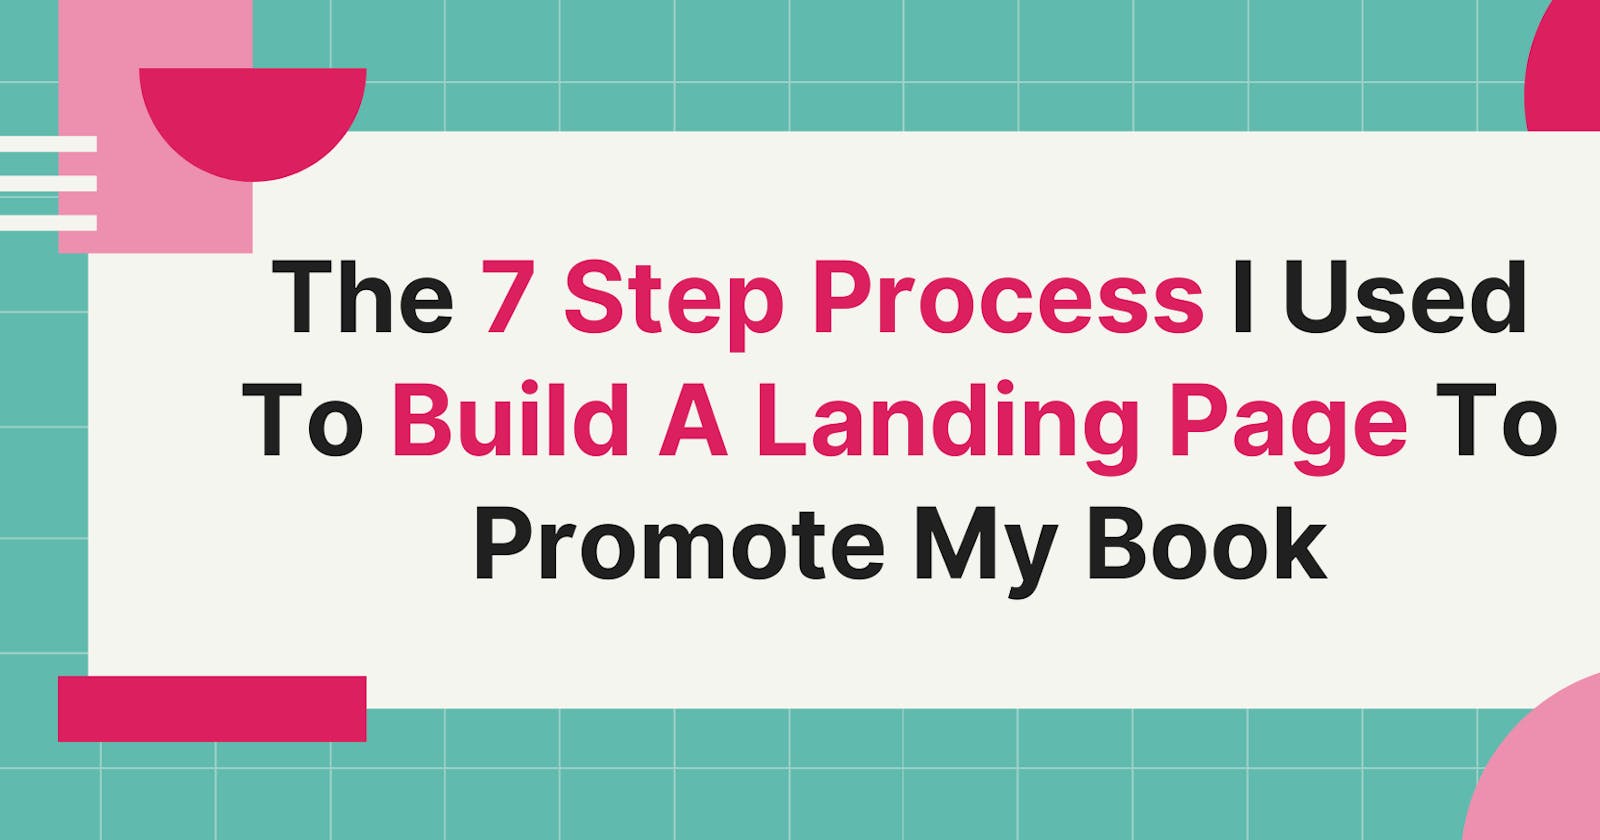 The 7 Step Process I Used To Build A Landing Page To Promote My Book